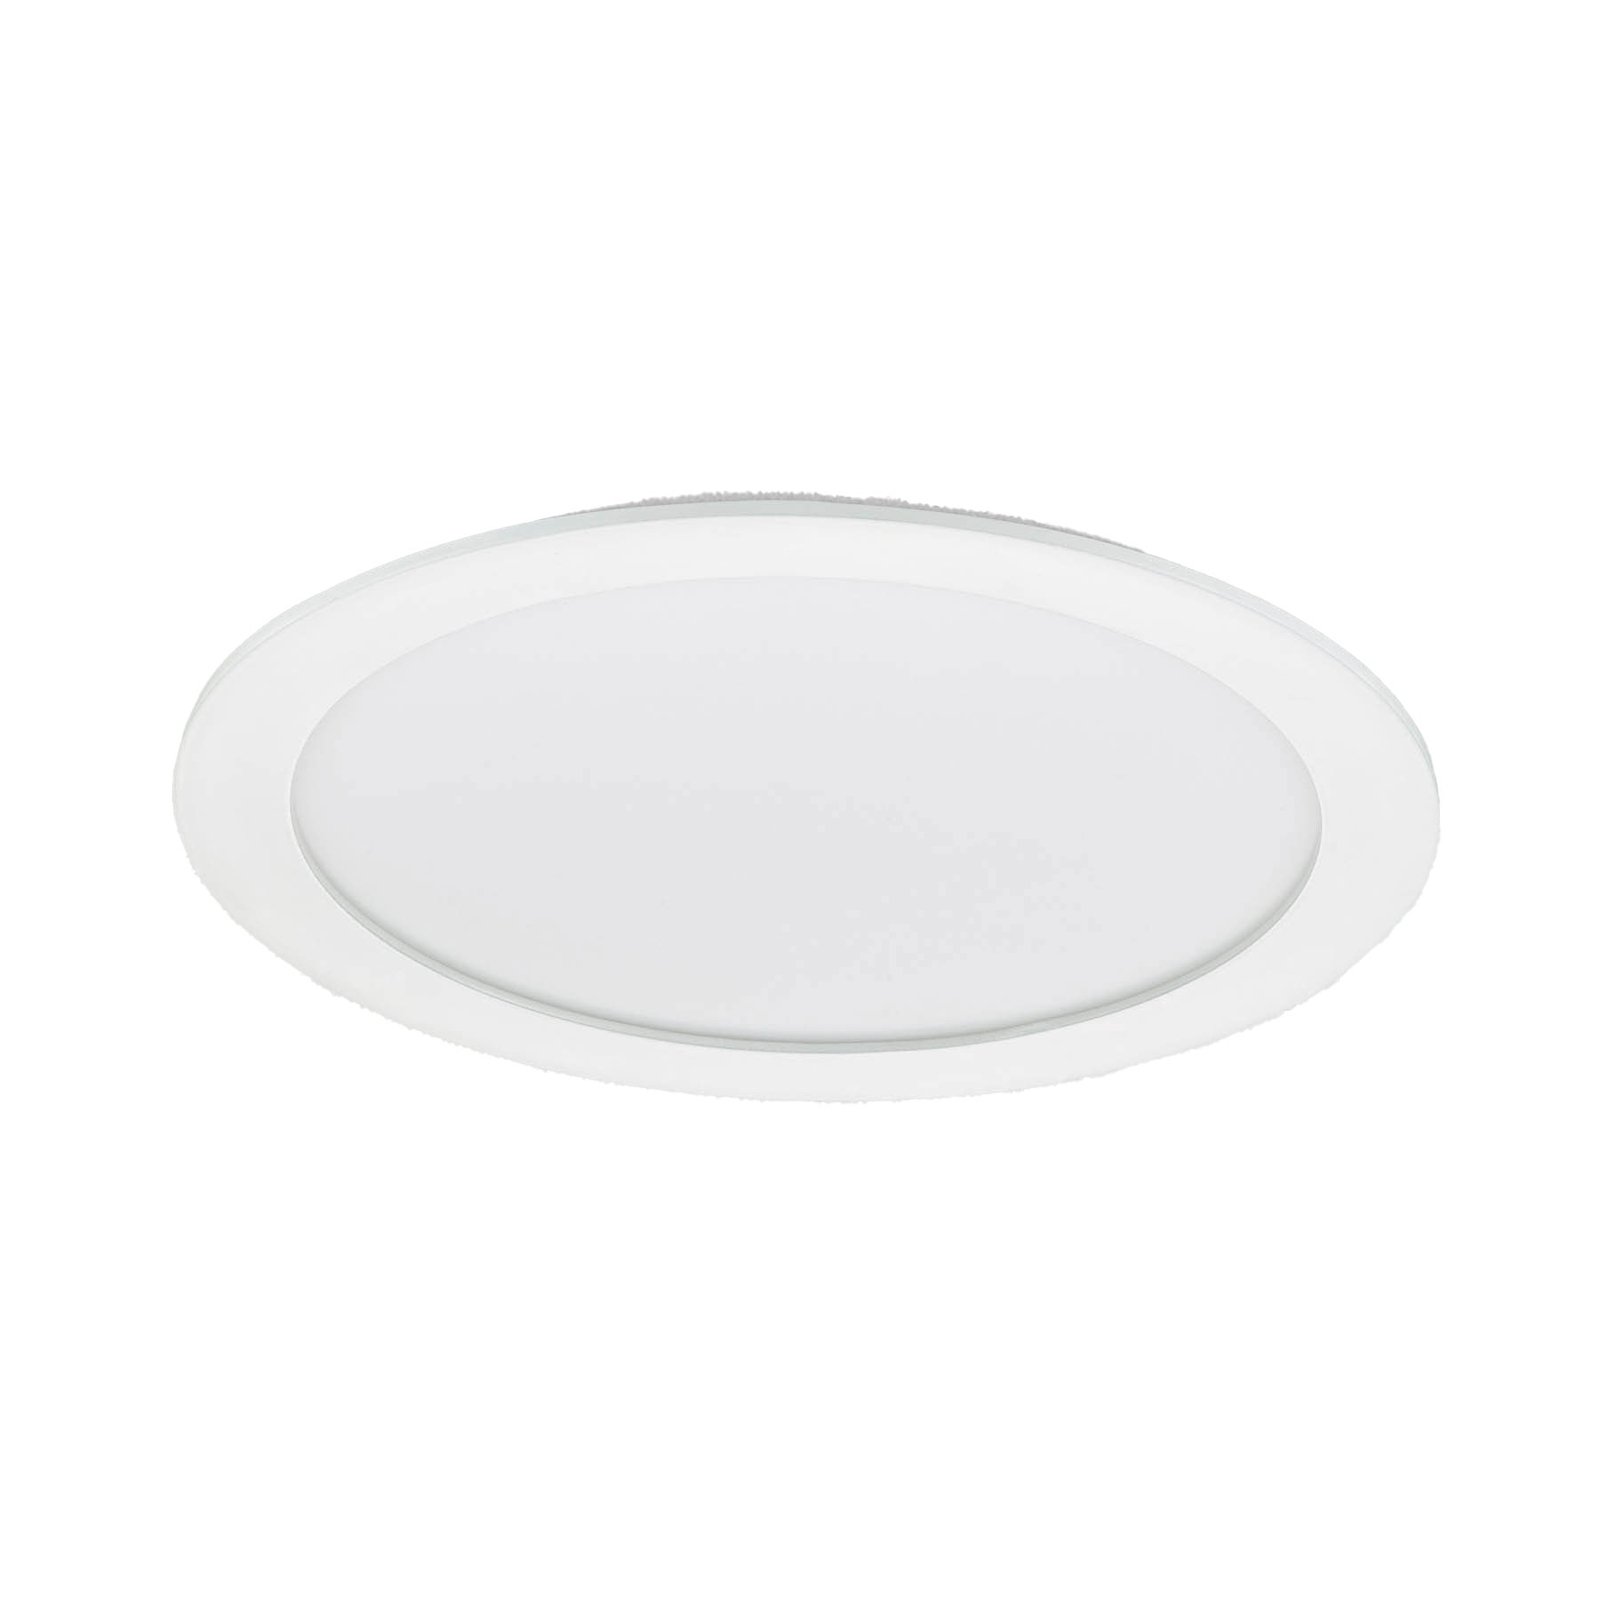 LED recessed downlight DN145B LED20S/830 PSD-E II WH